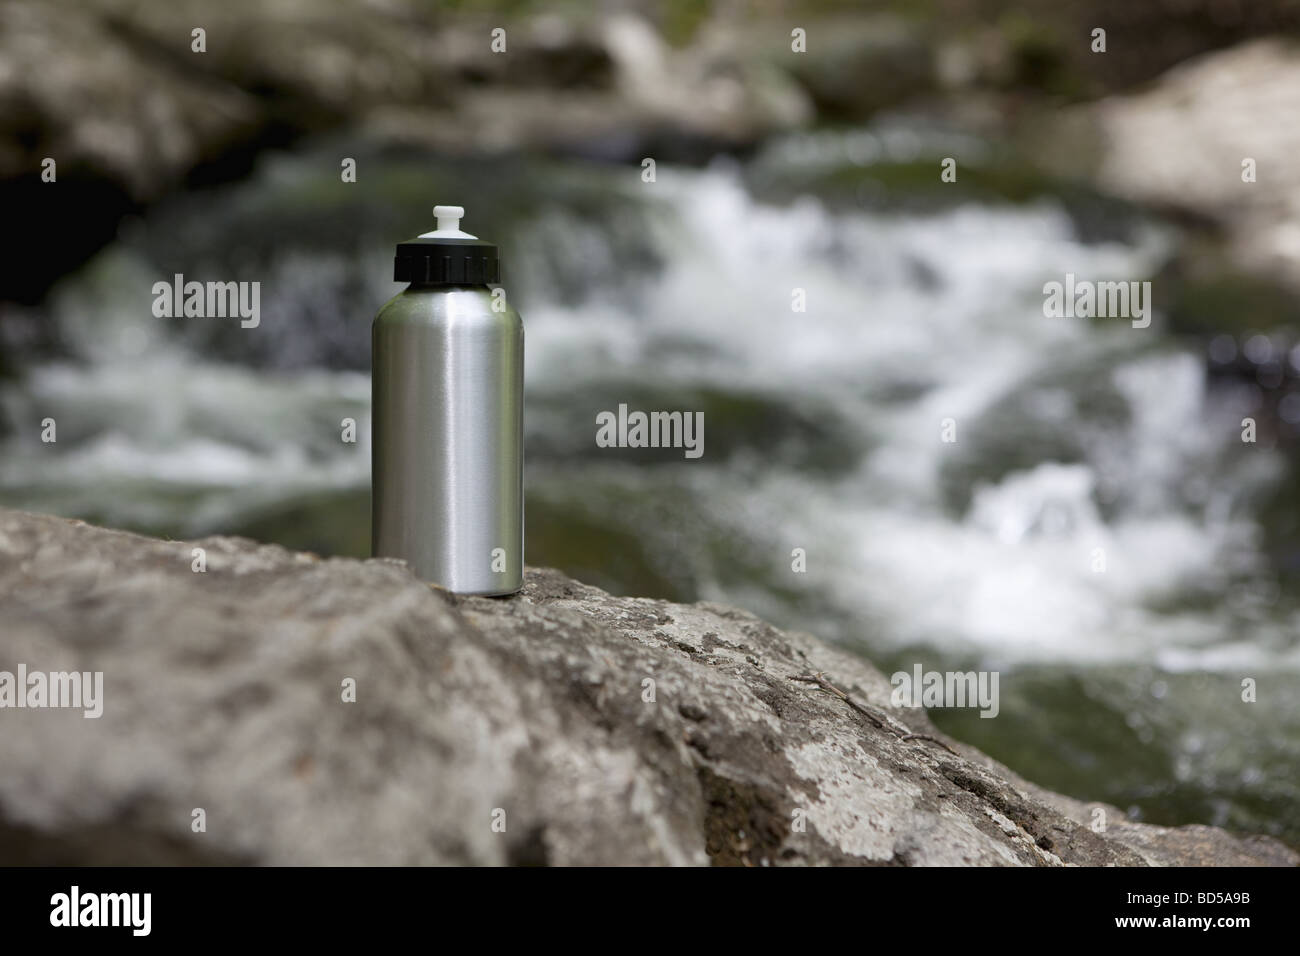 A reusable water bottle in the woods Stock Photo